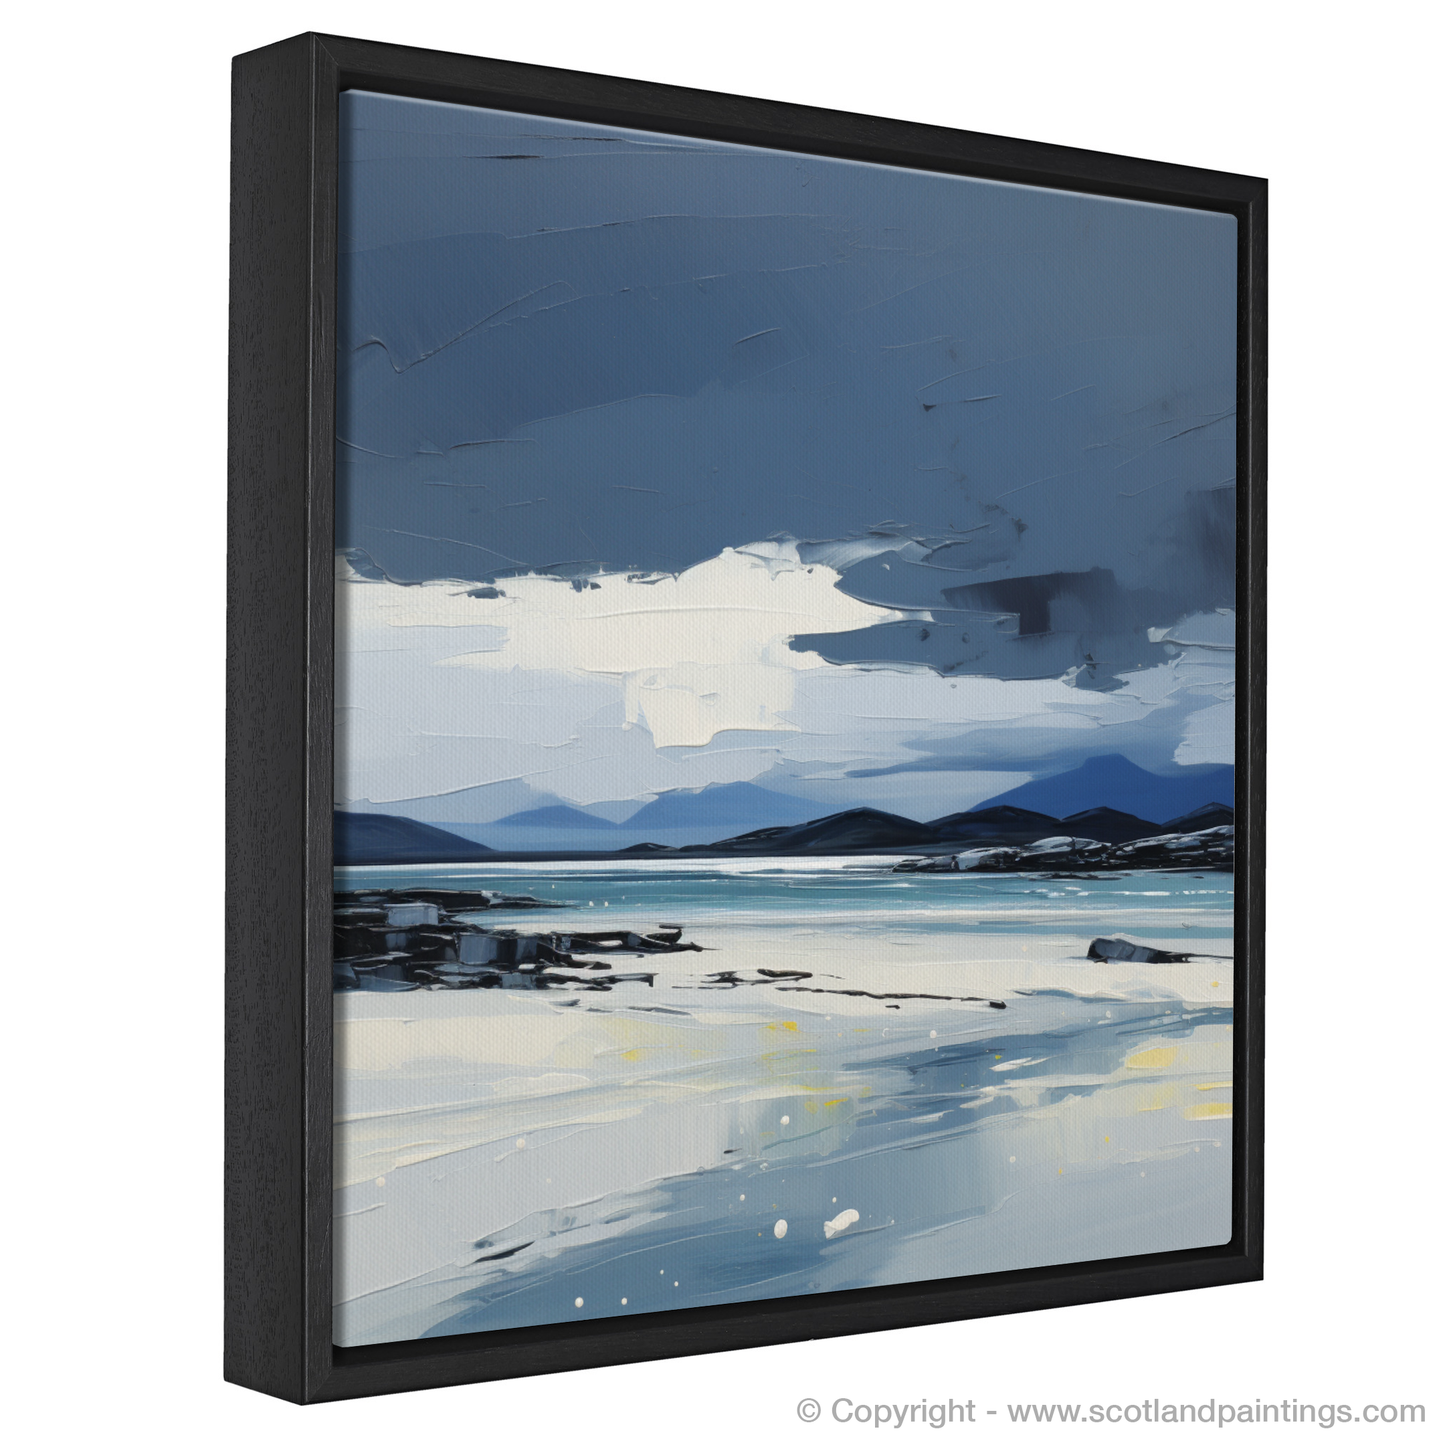 Painting and Art Print of Luskentyre Sands on the Isle of Harris entitled "Expressionism of Luskentyre Sands: A Scottish Coast Reverie".